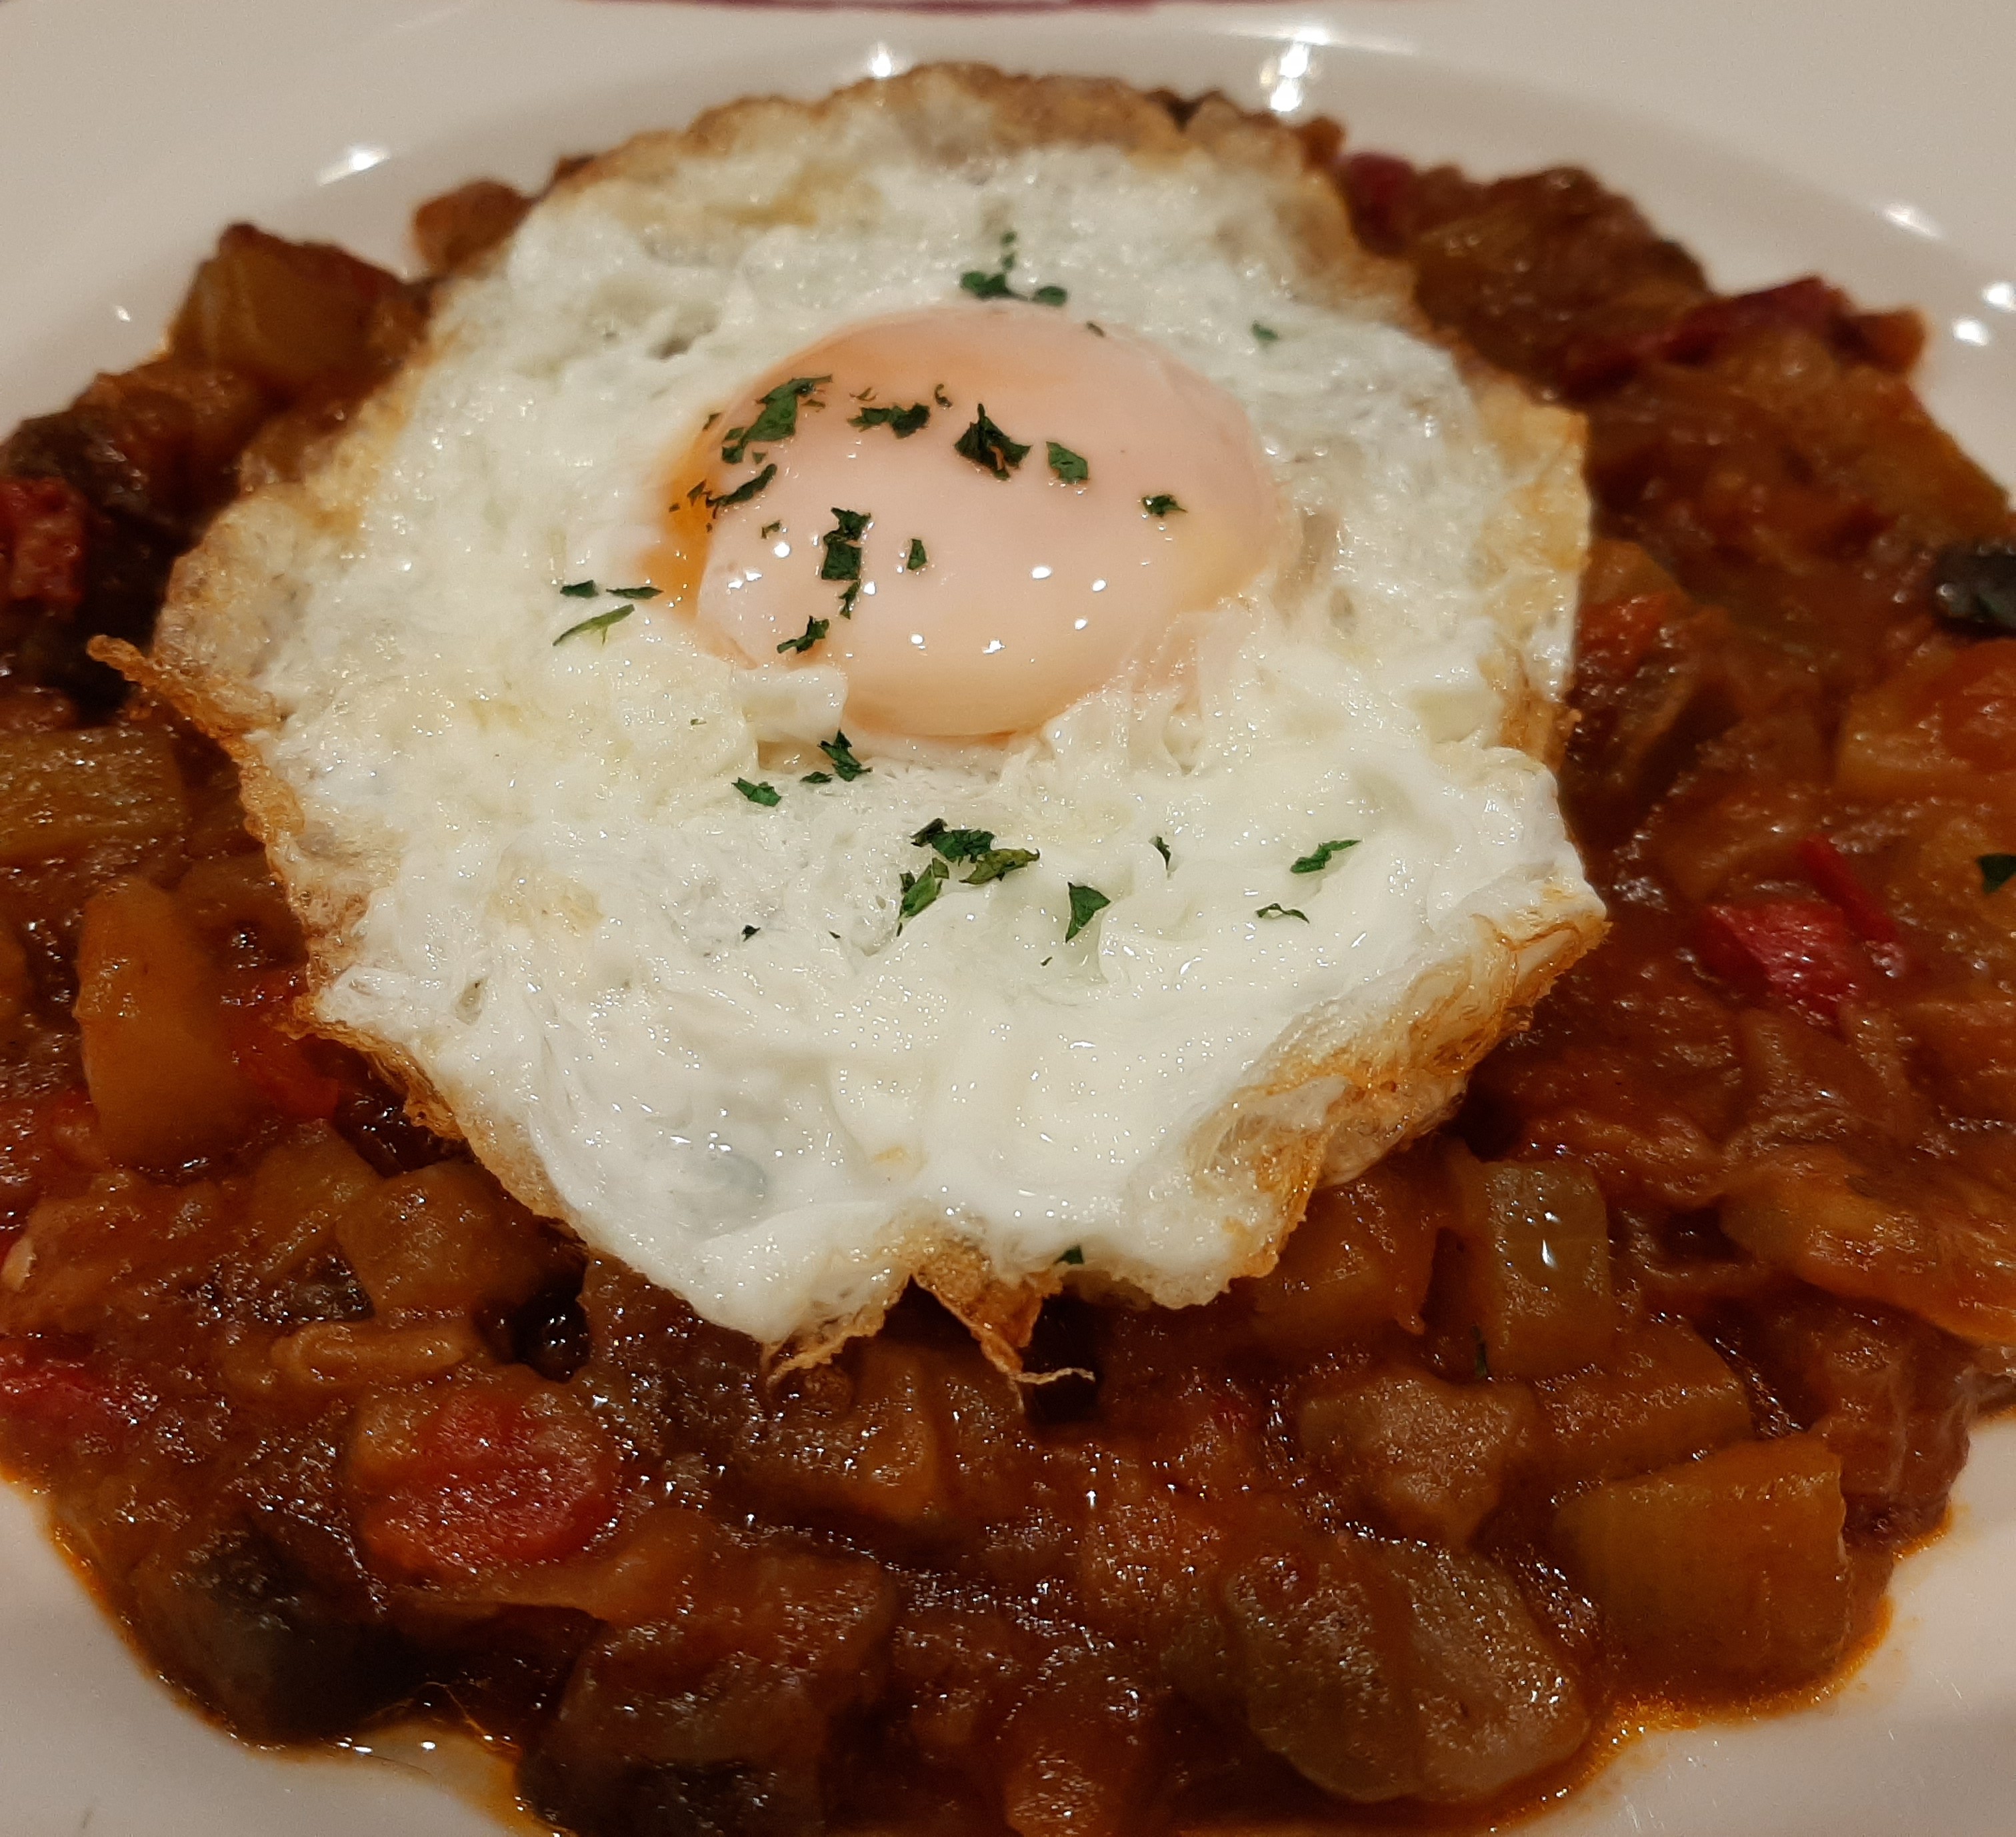 Basque-style ratatouille with fried egg